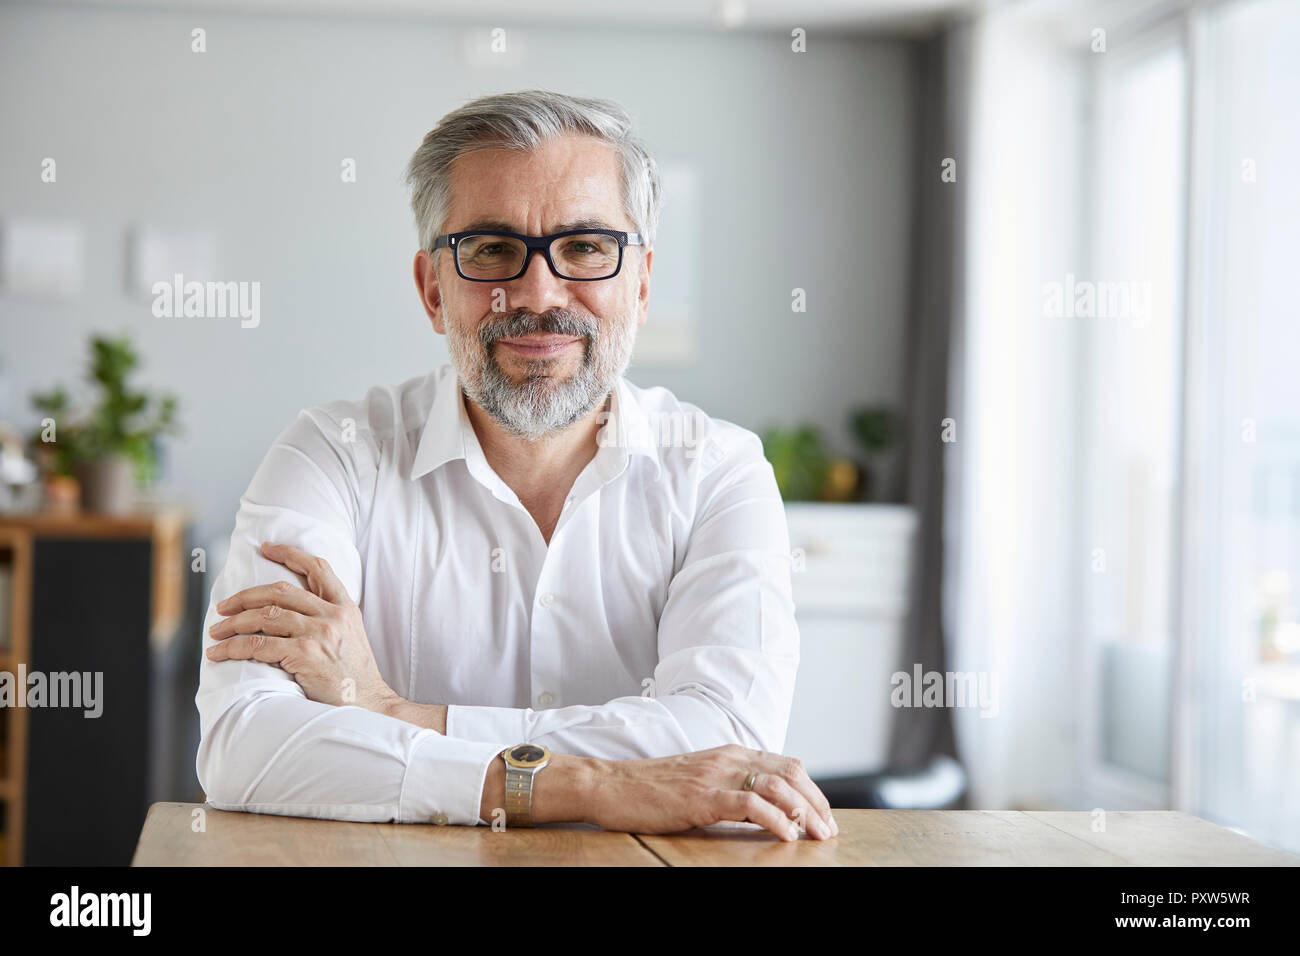 Portrait of content mature man at home Stock Photo